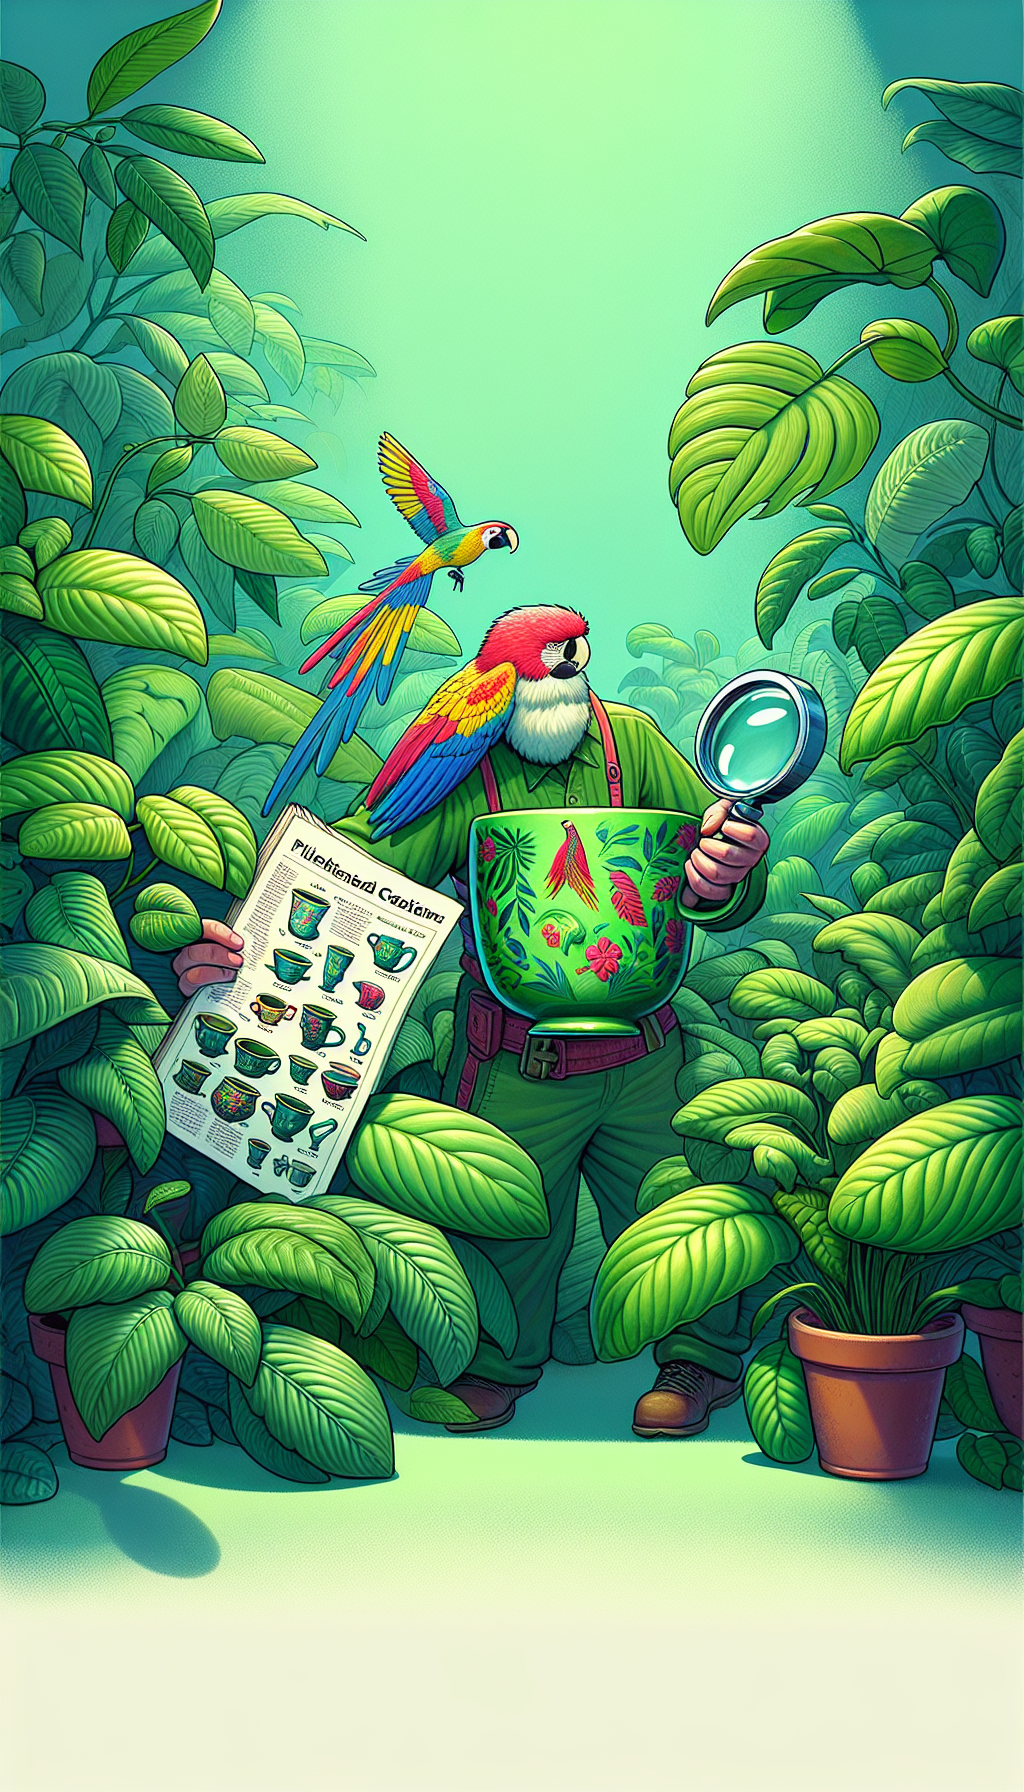 An intrepid collector, magnifying glass in hand, stands amidst a jungle of lush houseplants, their leaves morphing into rare vibrant Fire-King patterns. An illustrated Fire-King Pyrex spotting guide floats near them, as they excitedly point toward a hidden Jadite mug in the foliage, its elusive pattern partially obscured by a feisty, flame-colored parrot perched atop it.